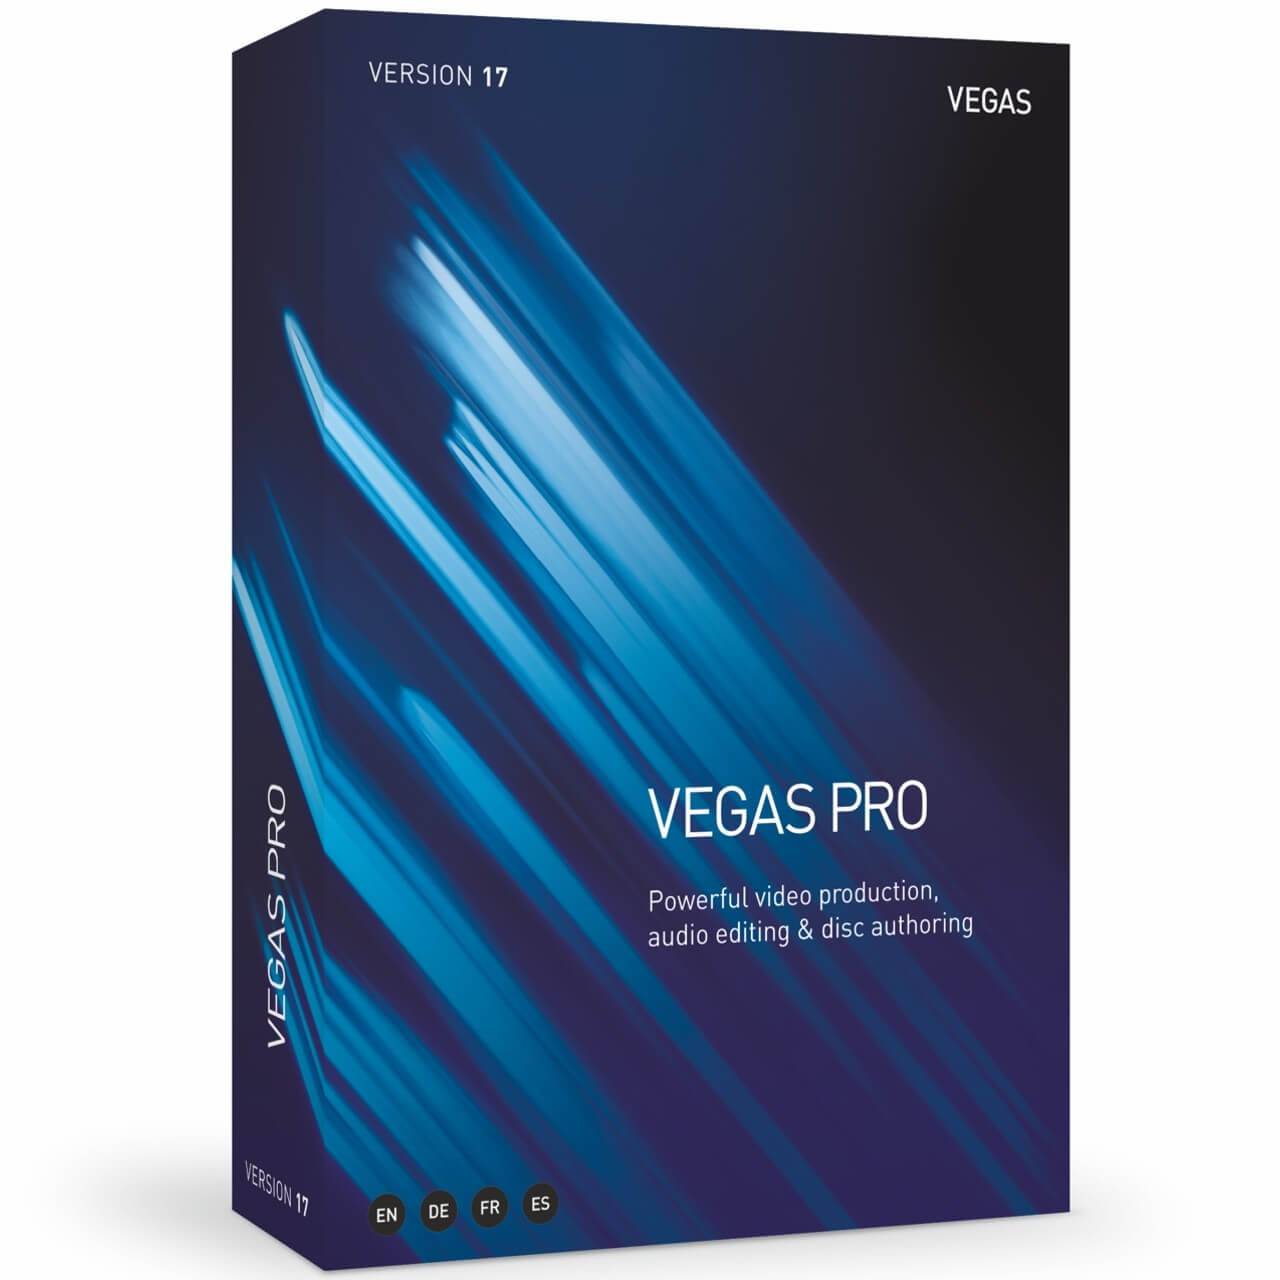 Sony Vegas Pro 19 Crack + Serial Number 2022 Download from licensedaily.com